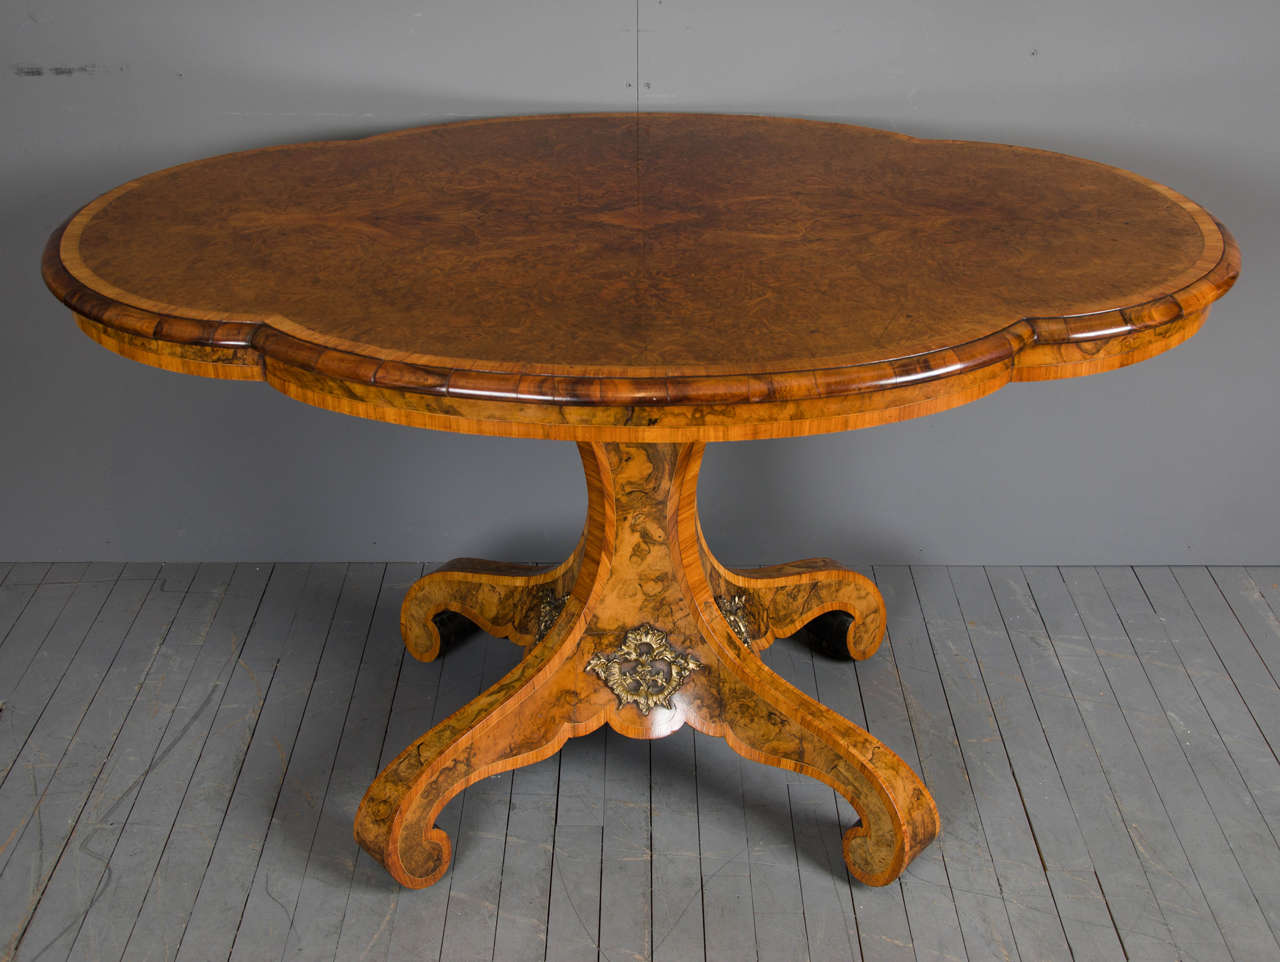 This excellent quality and highly unusual shaped burr Walnut Centre Table features a tilt top option, with an absolutely beautiful butterfly image (quarter veneered) grained top. The table has a cross banded border with a recessed apron and is